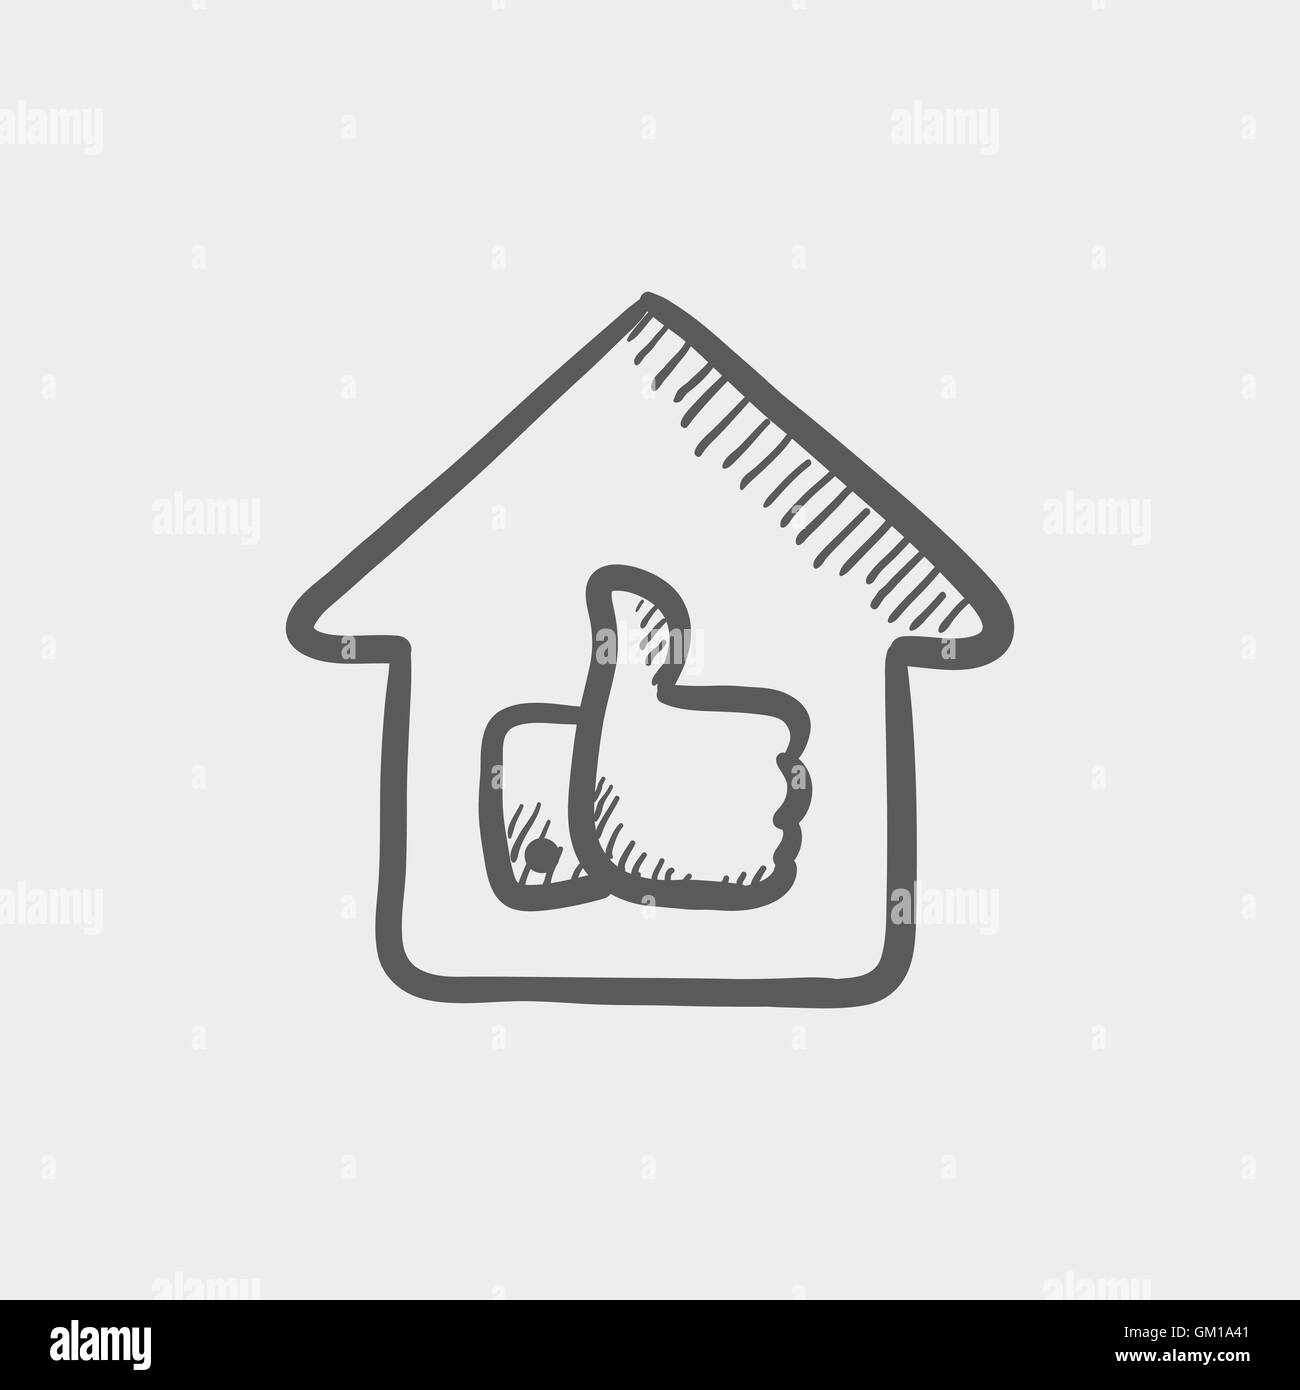 Approved housing loan sketch icon Stock Vector